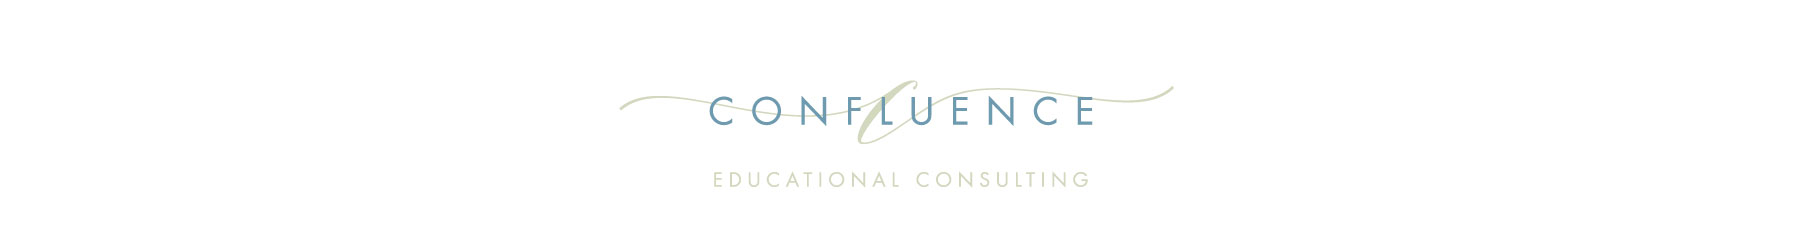 Confluence Educational Consulting 